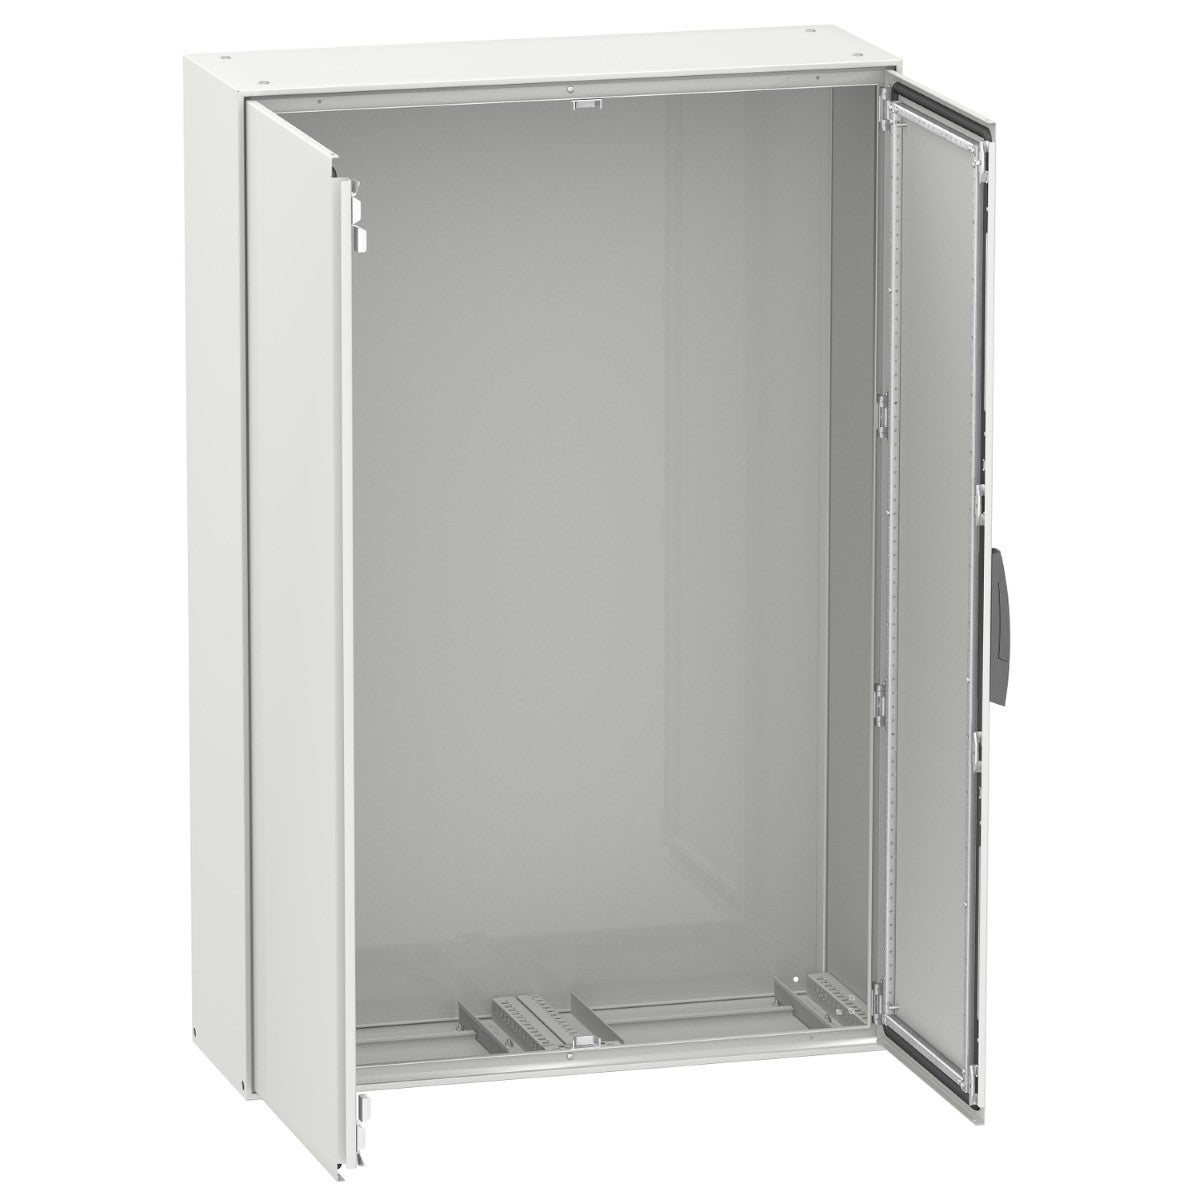 Spacial SM compact enclosure with mounting plate - 2000x1200x500 mm